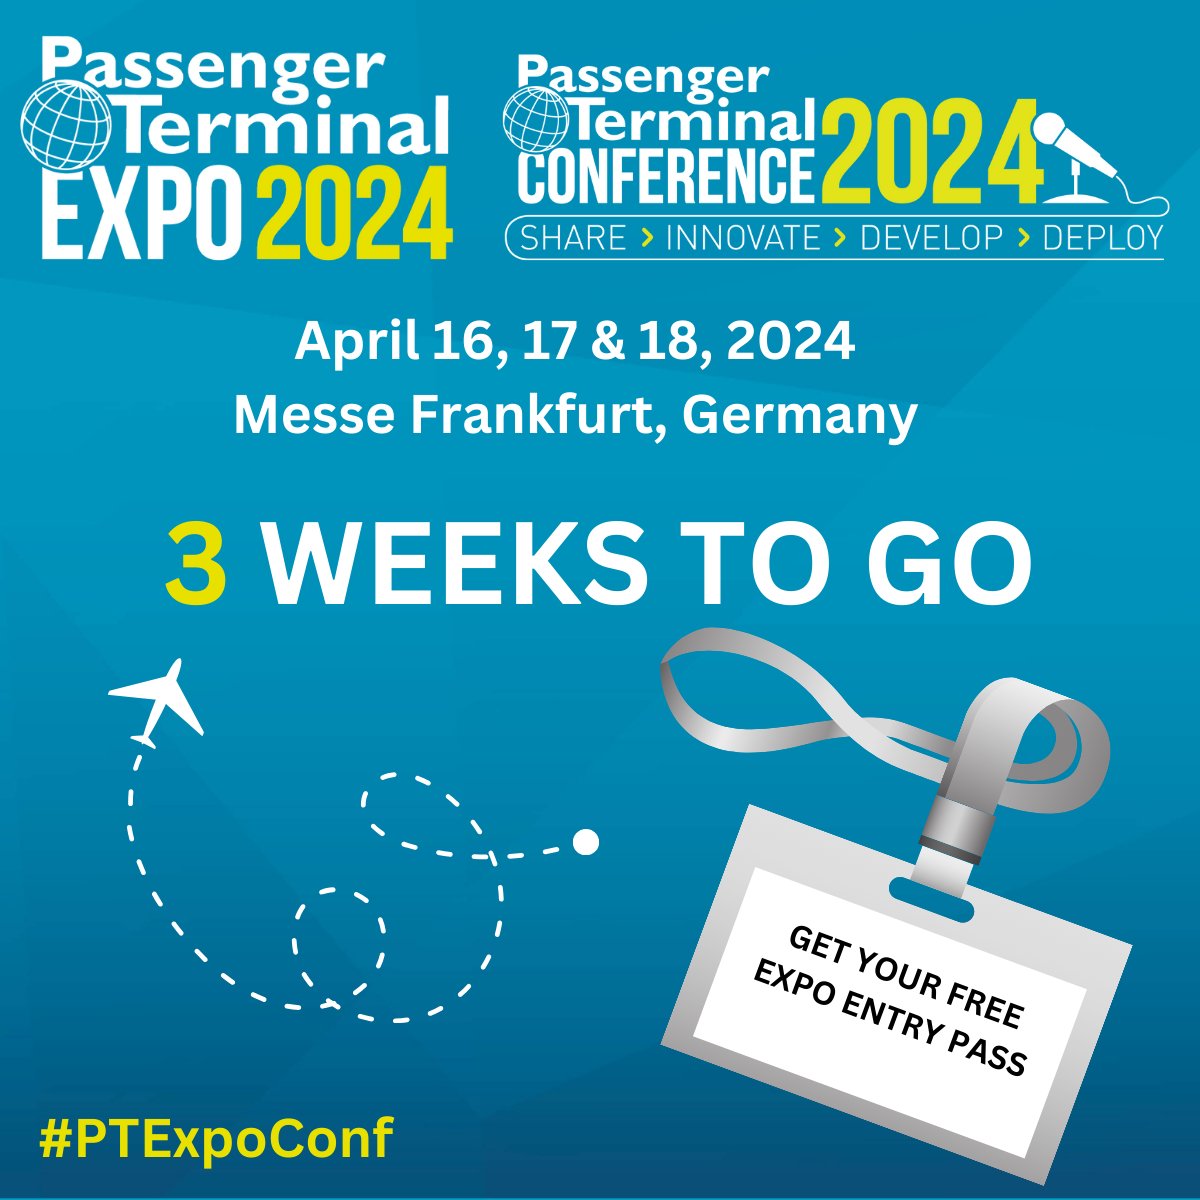 3-2-1! It is just 3 weeks until Passenger Terminal Expo and Conference opens! Taking place April 16, 17 & 18, in Frankfurt – join us at THE world’s leading airport and operations show of the year! Get your FREE FastTrack exhibition entry pass: bit.ly/49Qf1Nd #PTExpoConf